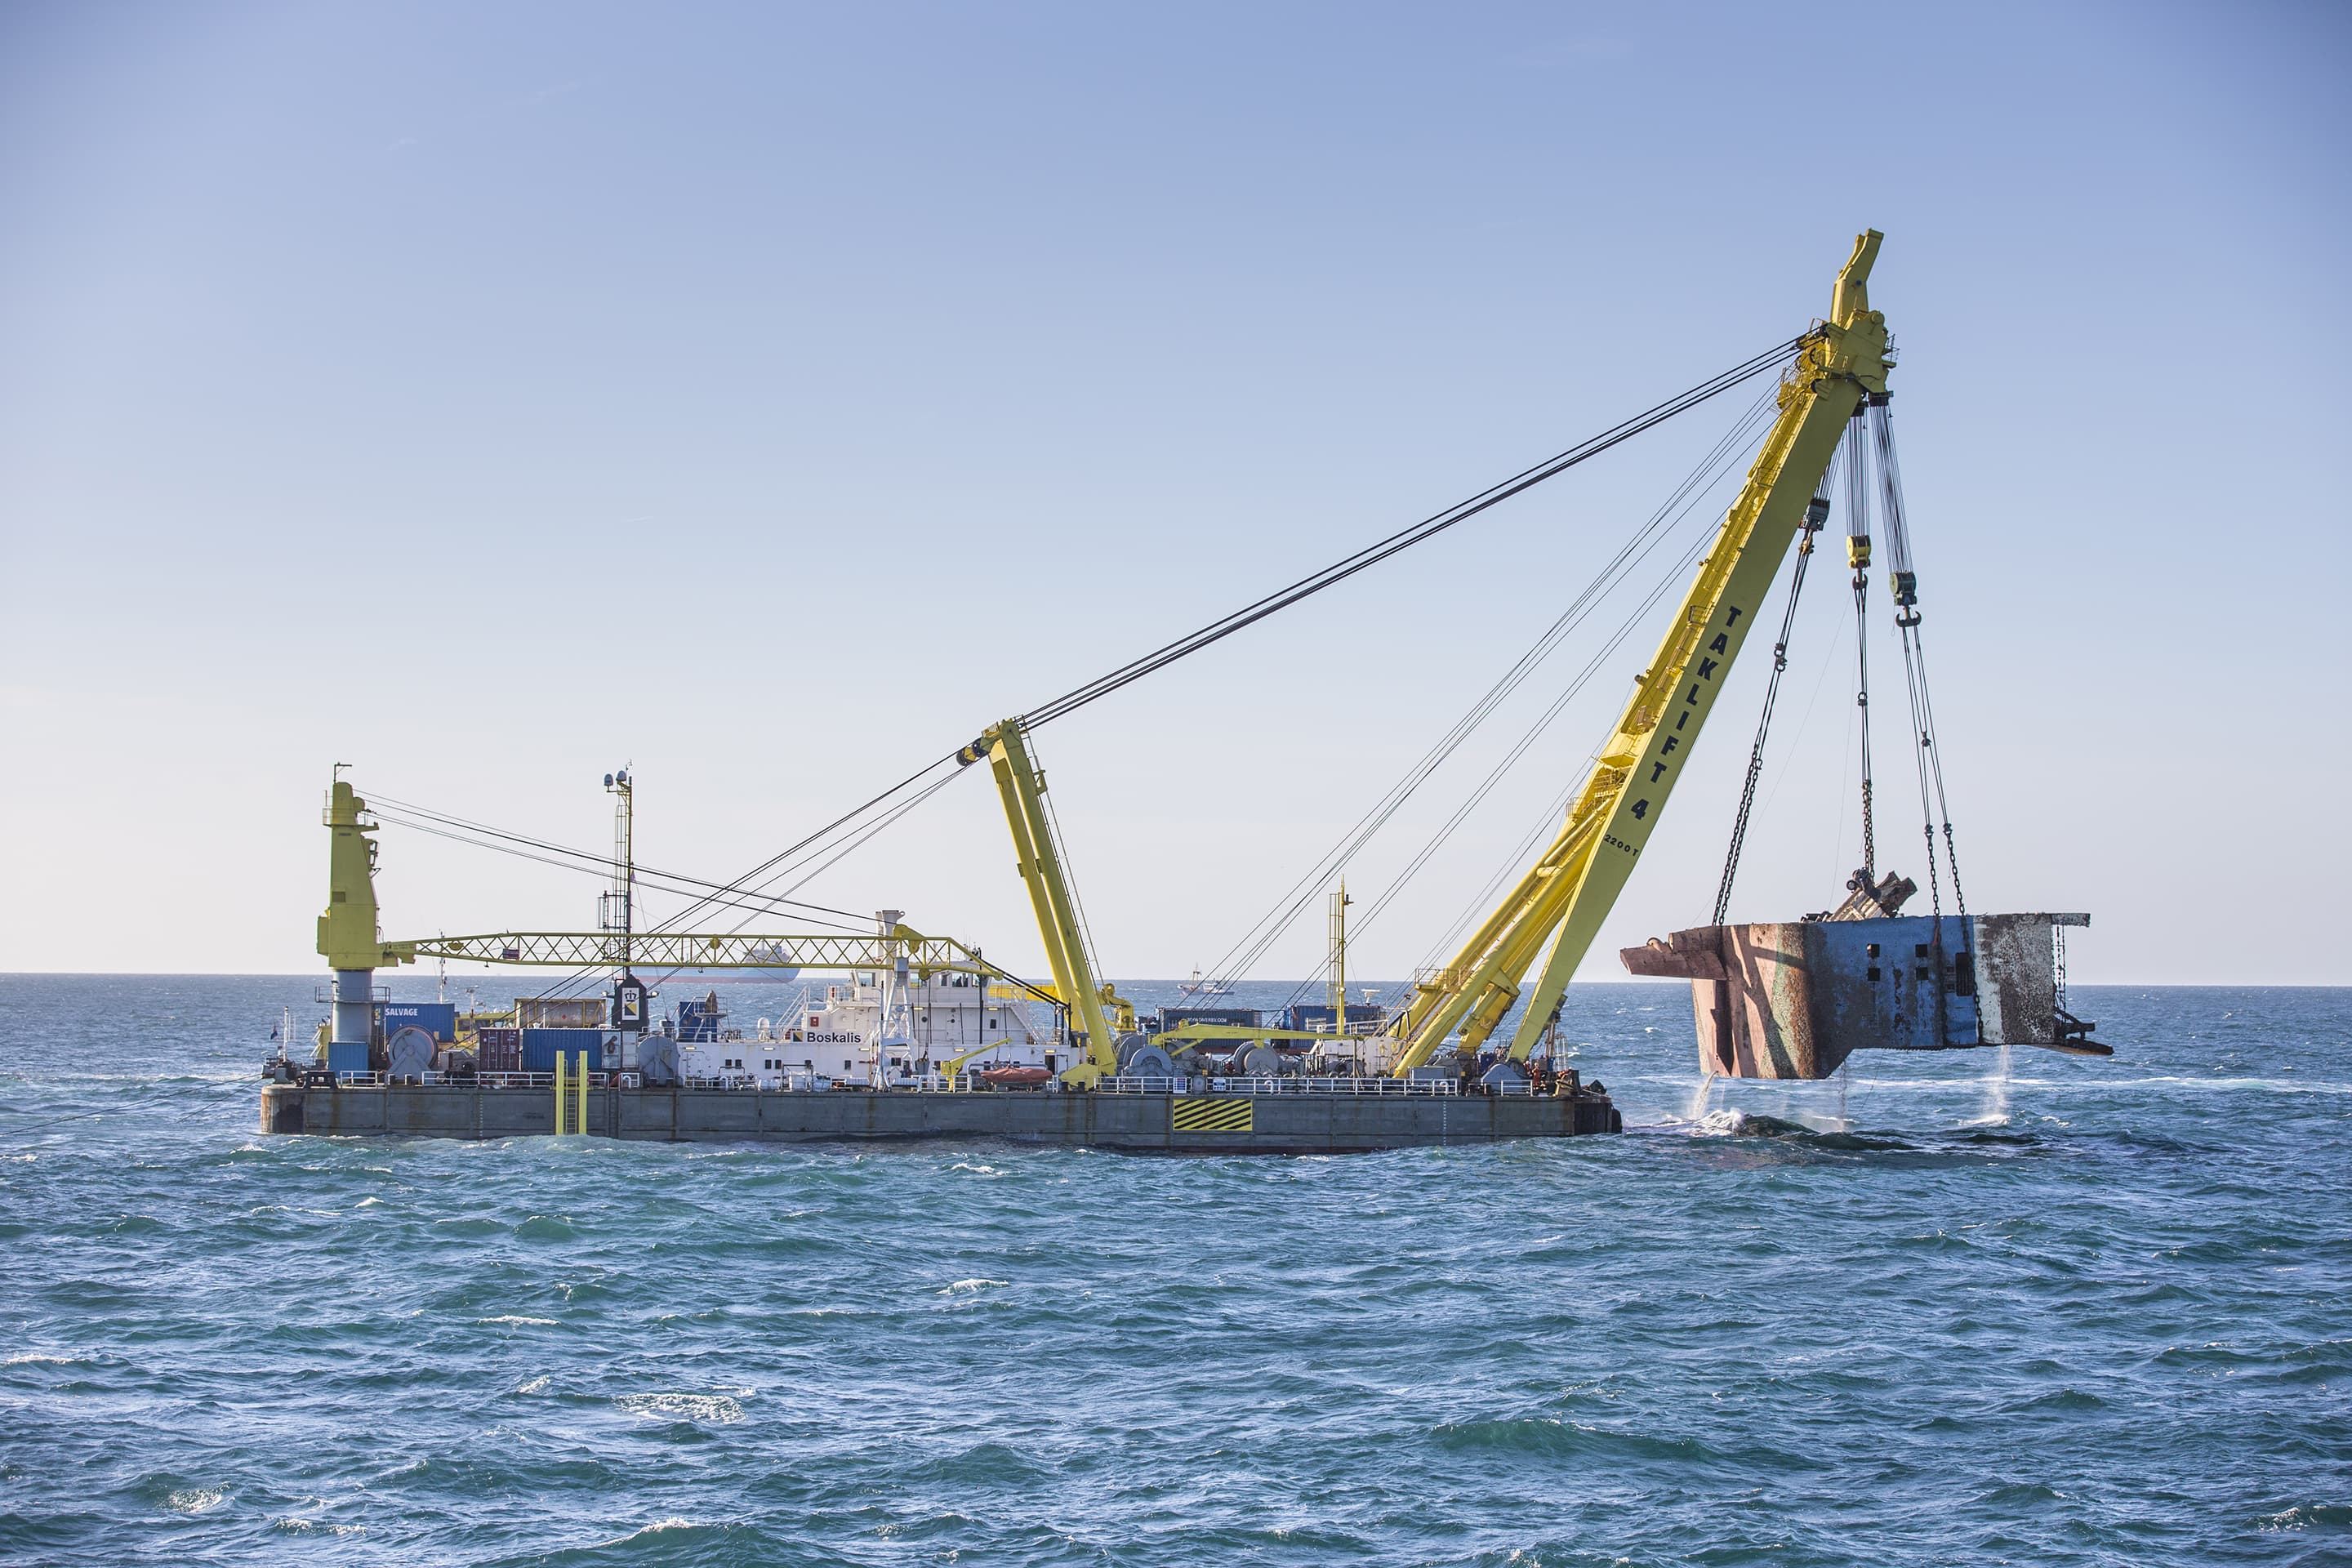 The floating sheerleg Taklift 4 is lifting one of the wreck sections